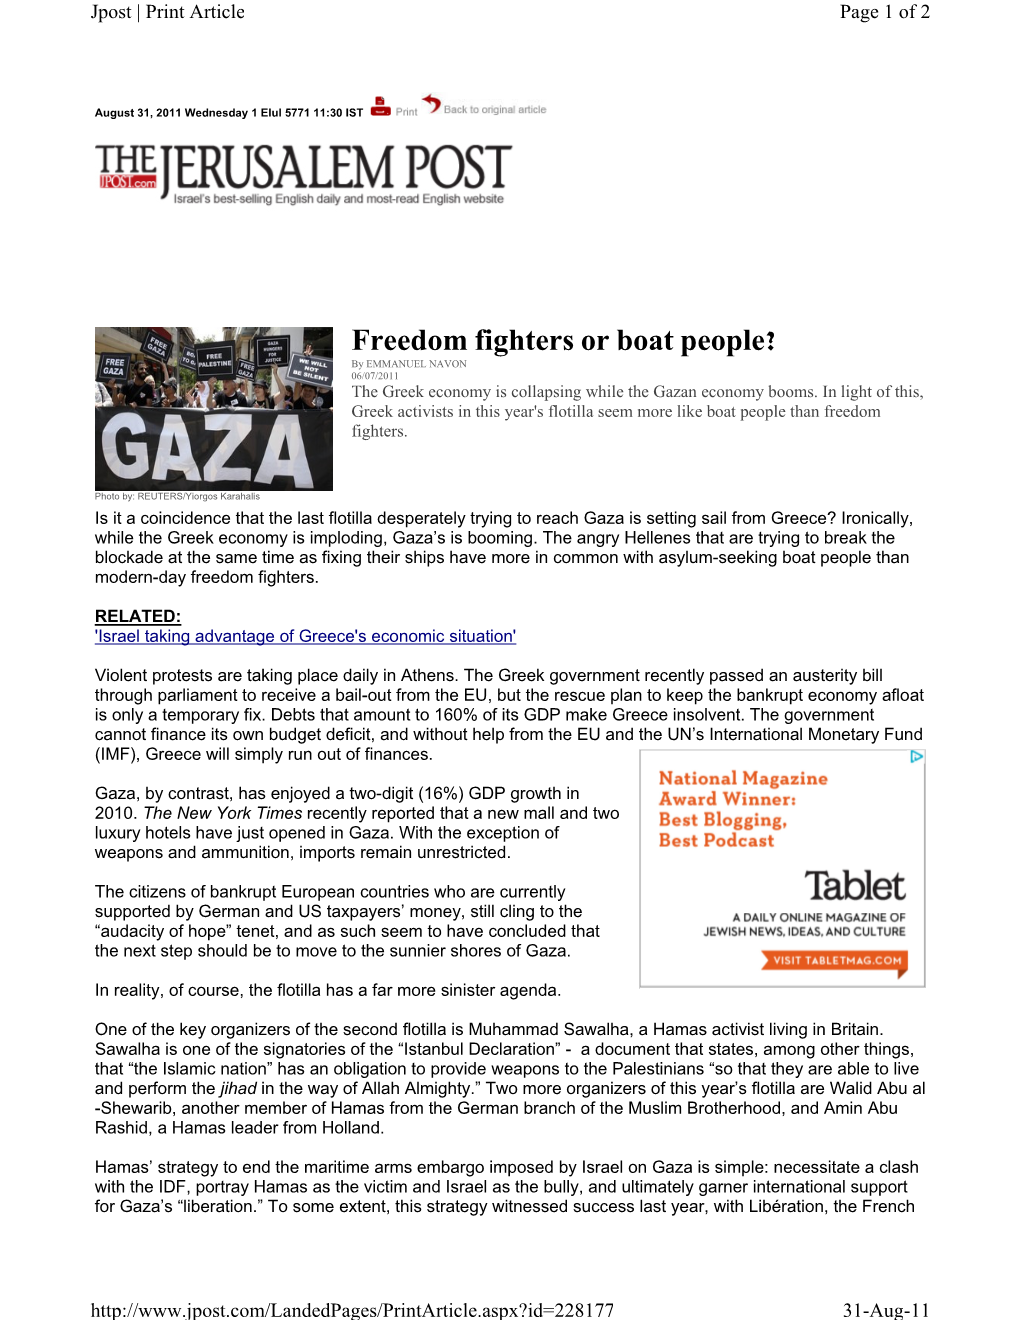 Freedom Fighters Or Boat People? by EMMANUEL NAVON 06/07/2011 the Greek Economy Is Collapsing While the Gazan Economy Booms